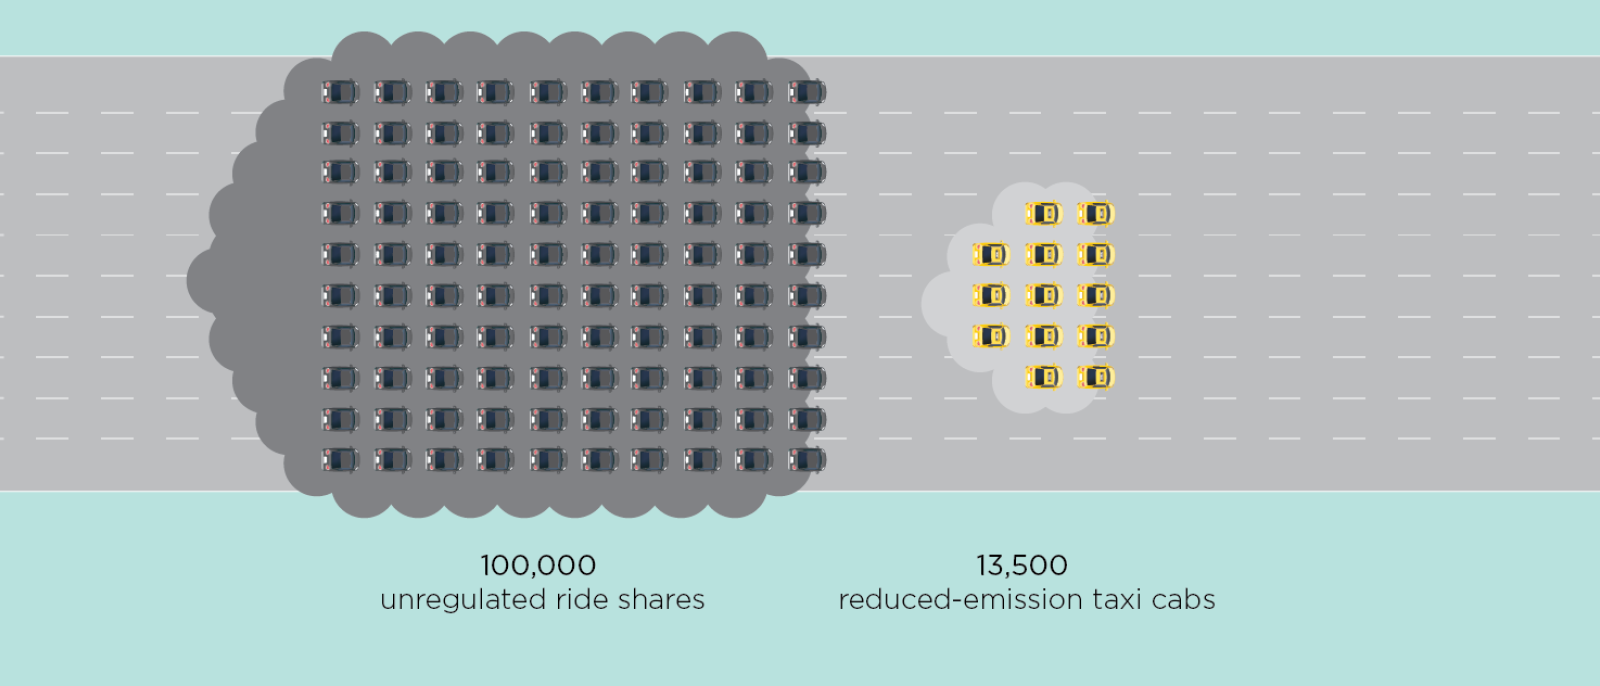 100,000 unregulated ride shares versus 13,500 reduced emissions taxi cabs